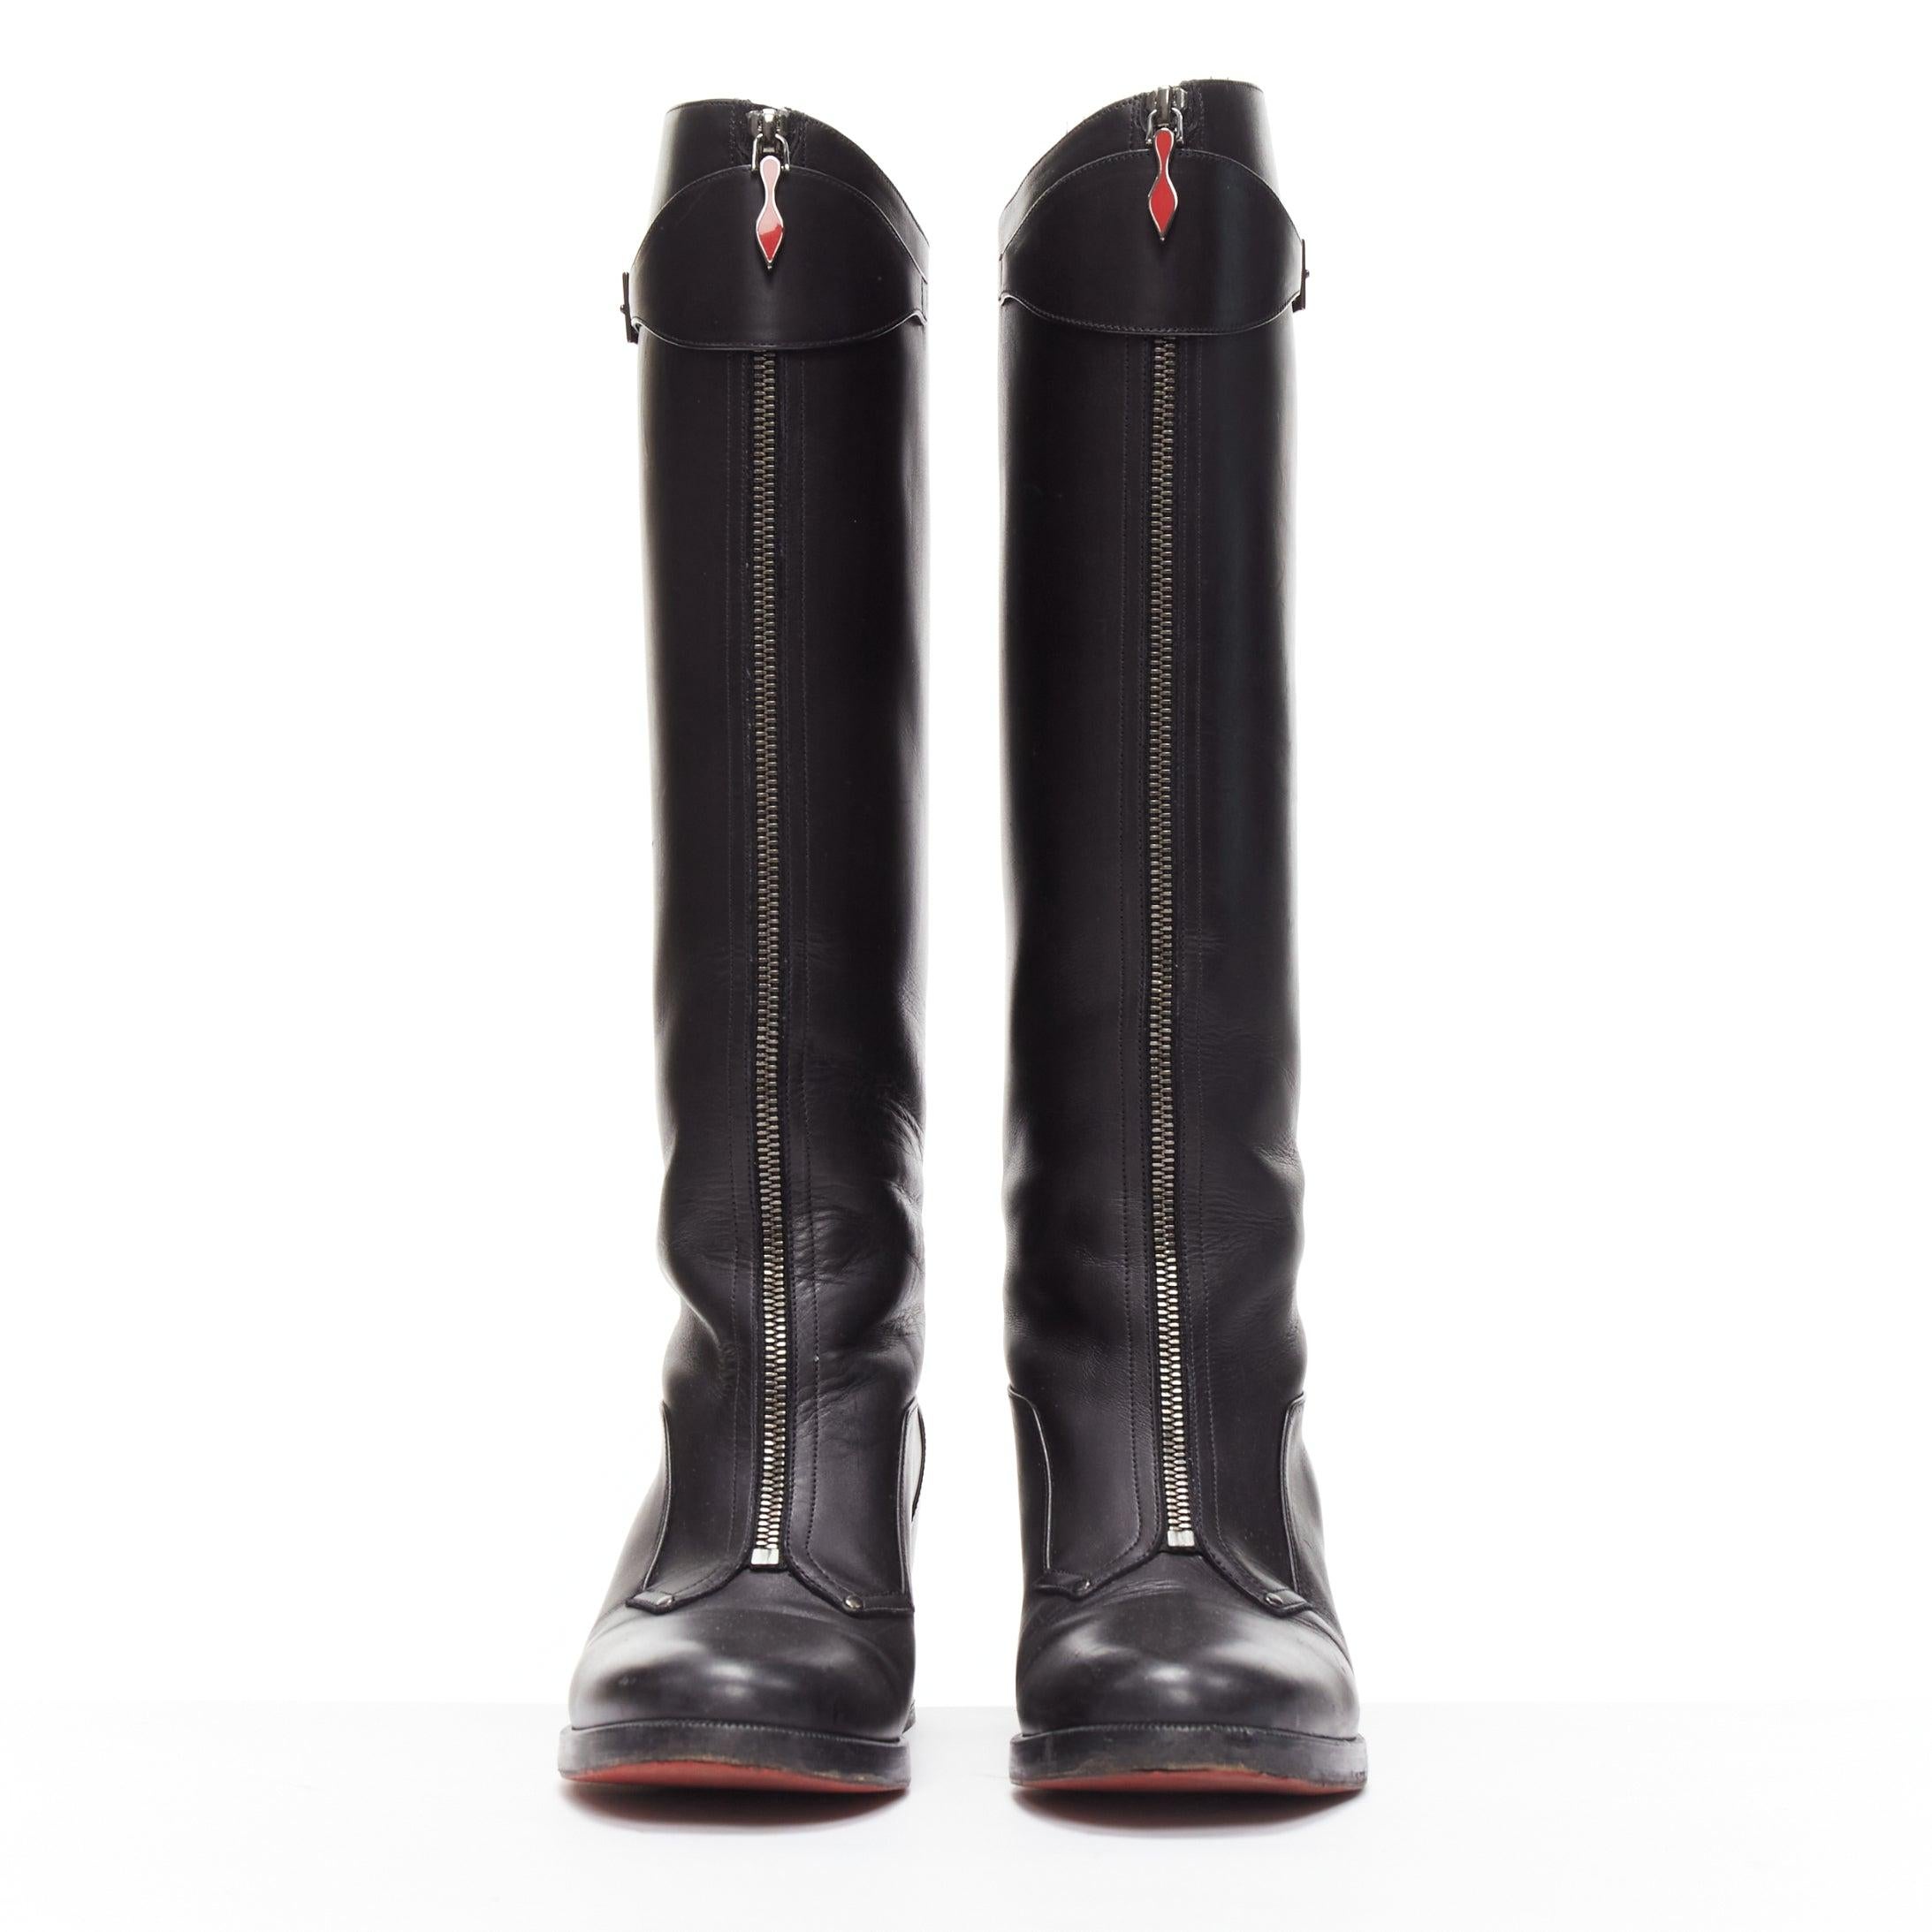 Women's CHRISTIAN LOUBOUTIN black leather zip front concealed wedge riding boot EU40 For Sale